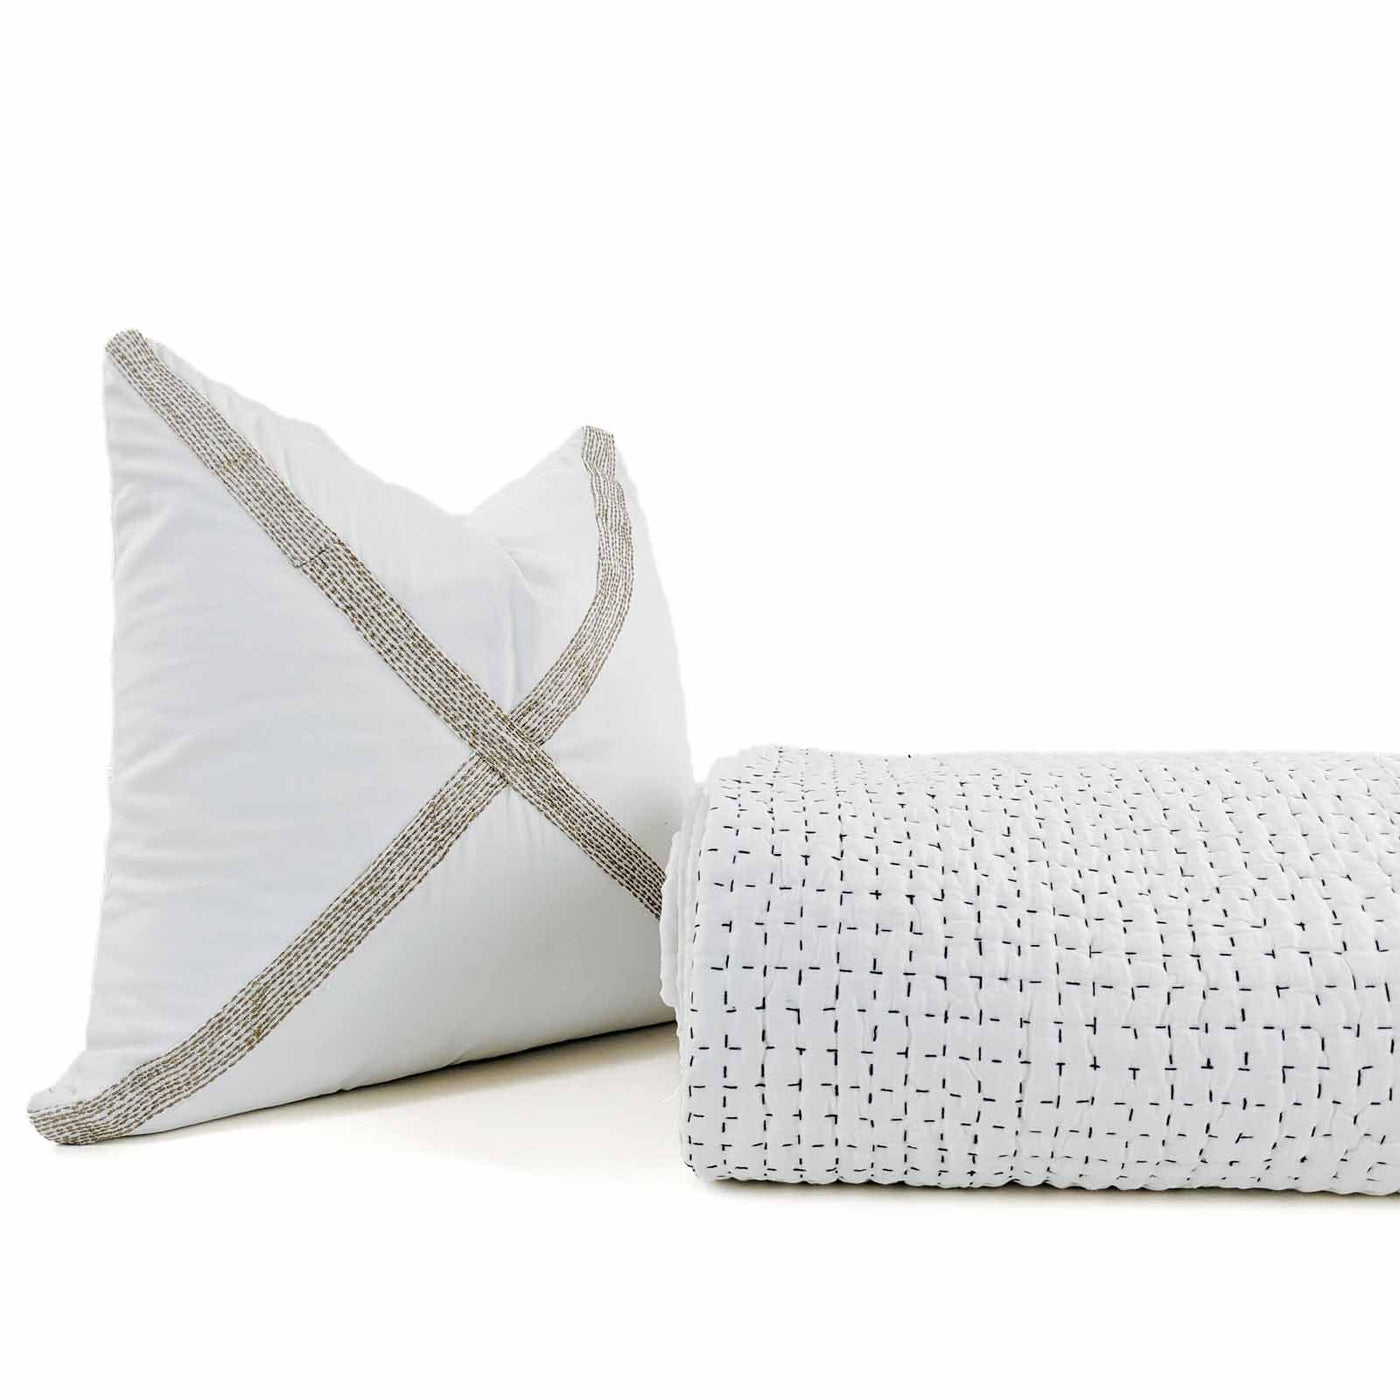 Our Quilted Bed Spreads are filled with dual layers of high quality cotton to give them a fluffy wholesome feel